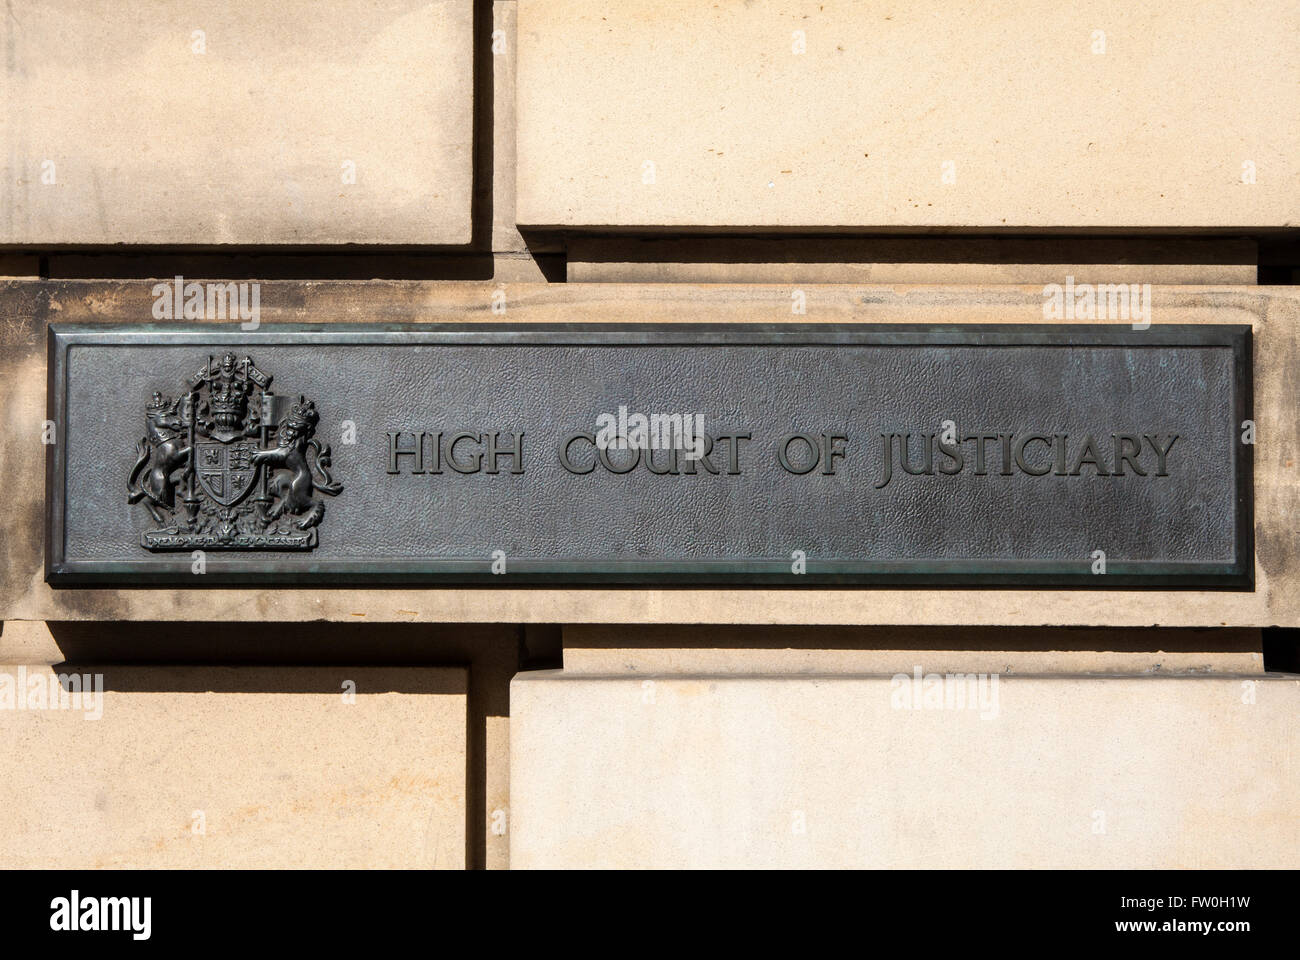 EDINBURGH, SCOTLAND - MARCH 10TH 2016: The High Court of Justiciary in the City of Edinburgh, on 10th March 2016.  It is also kn Stock Photo